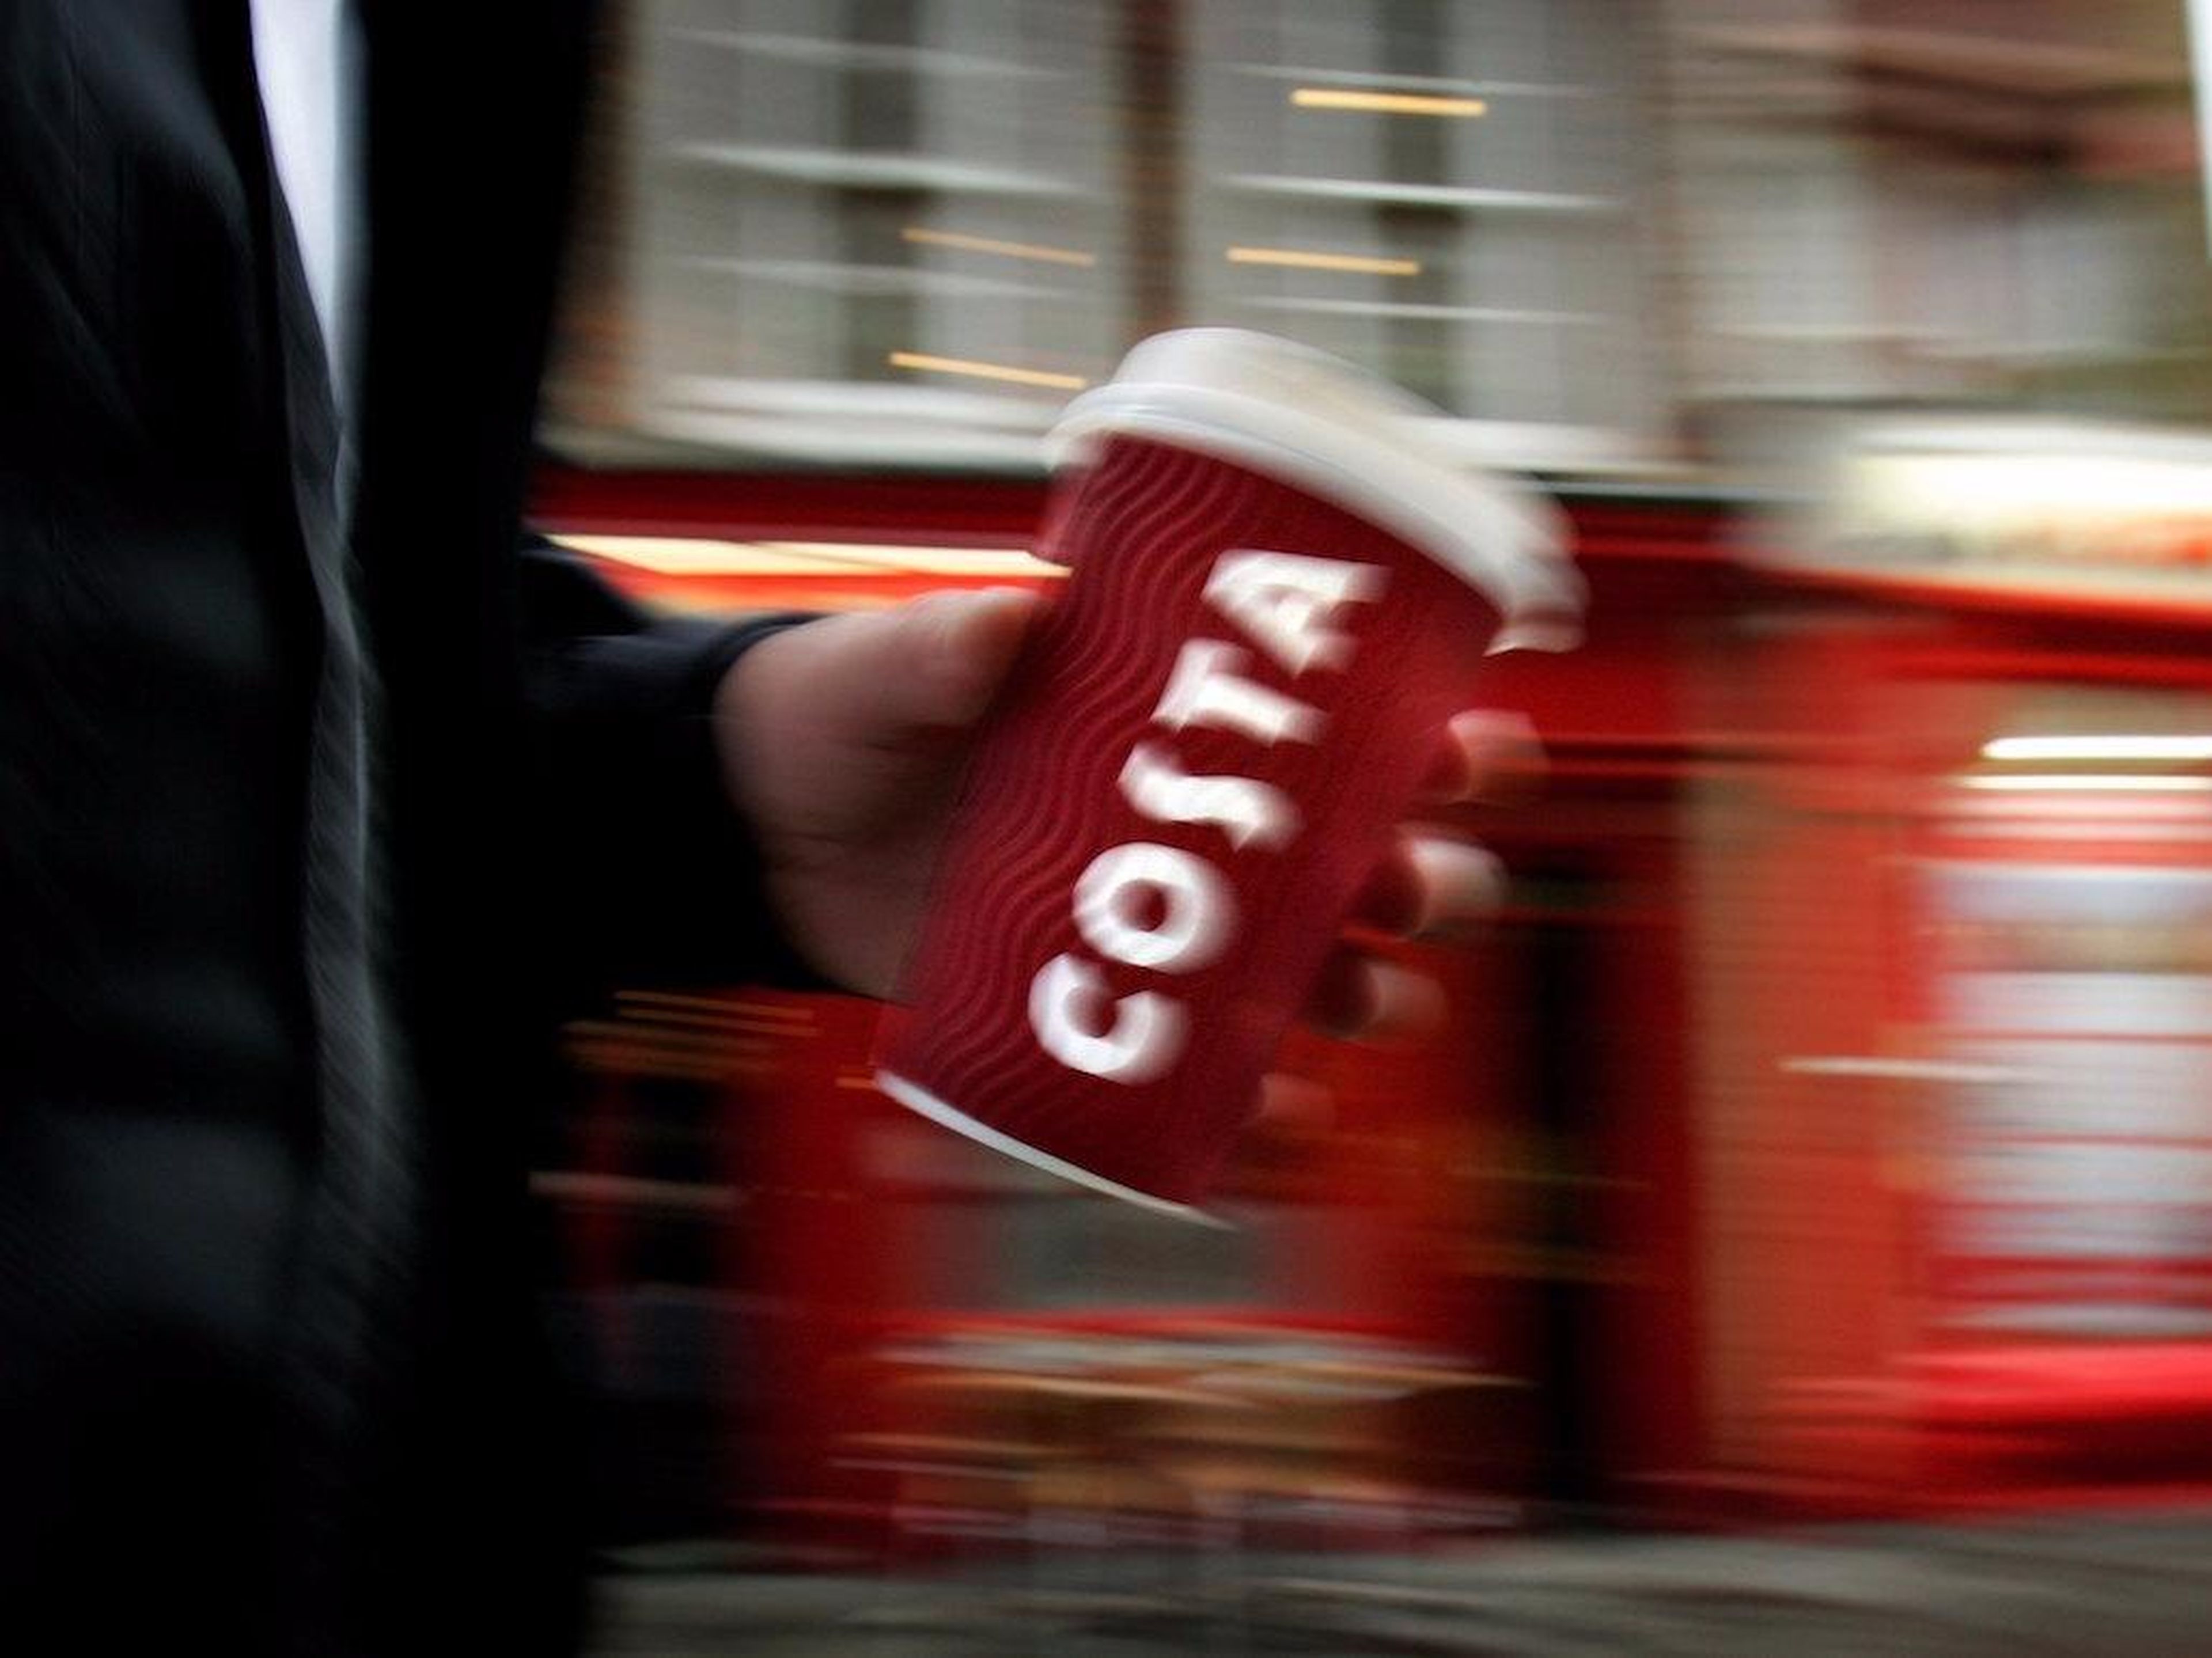 Costa Coffee is a major competitor of Starbucks.